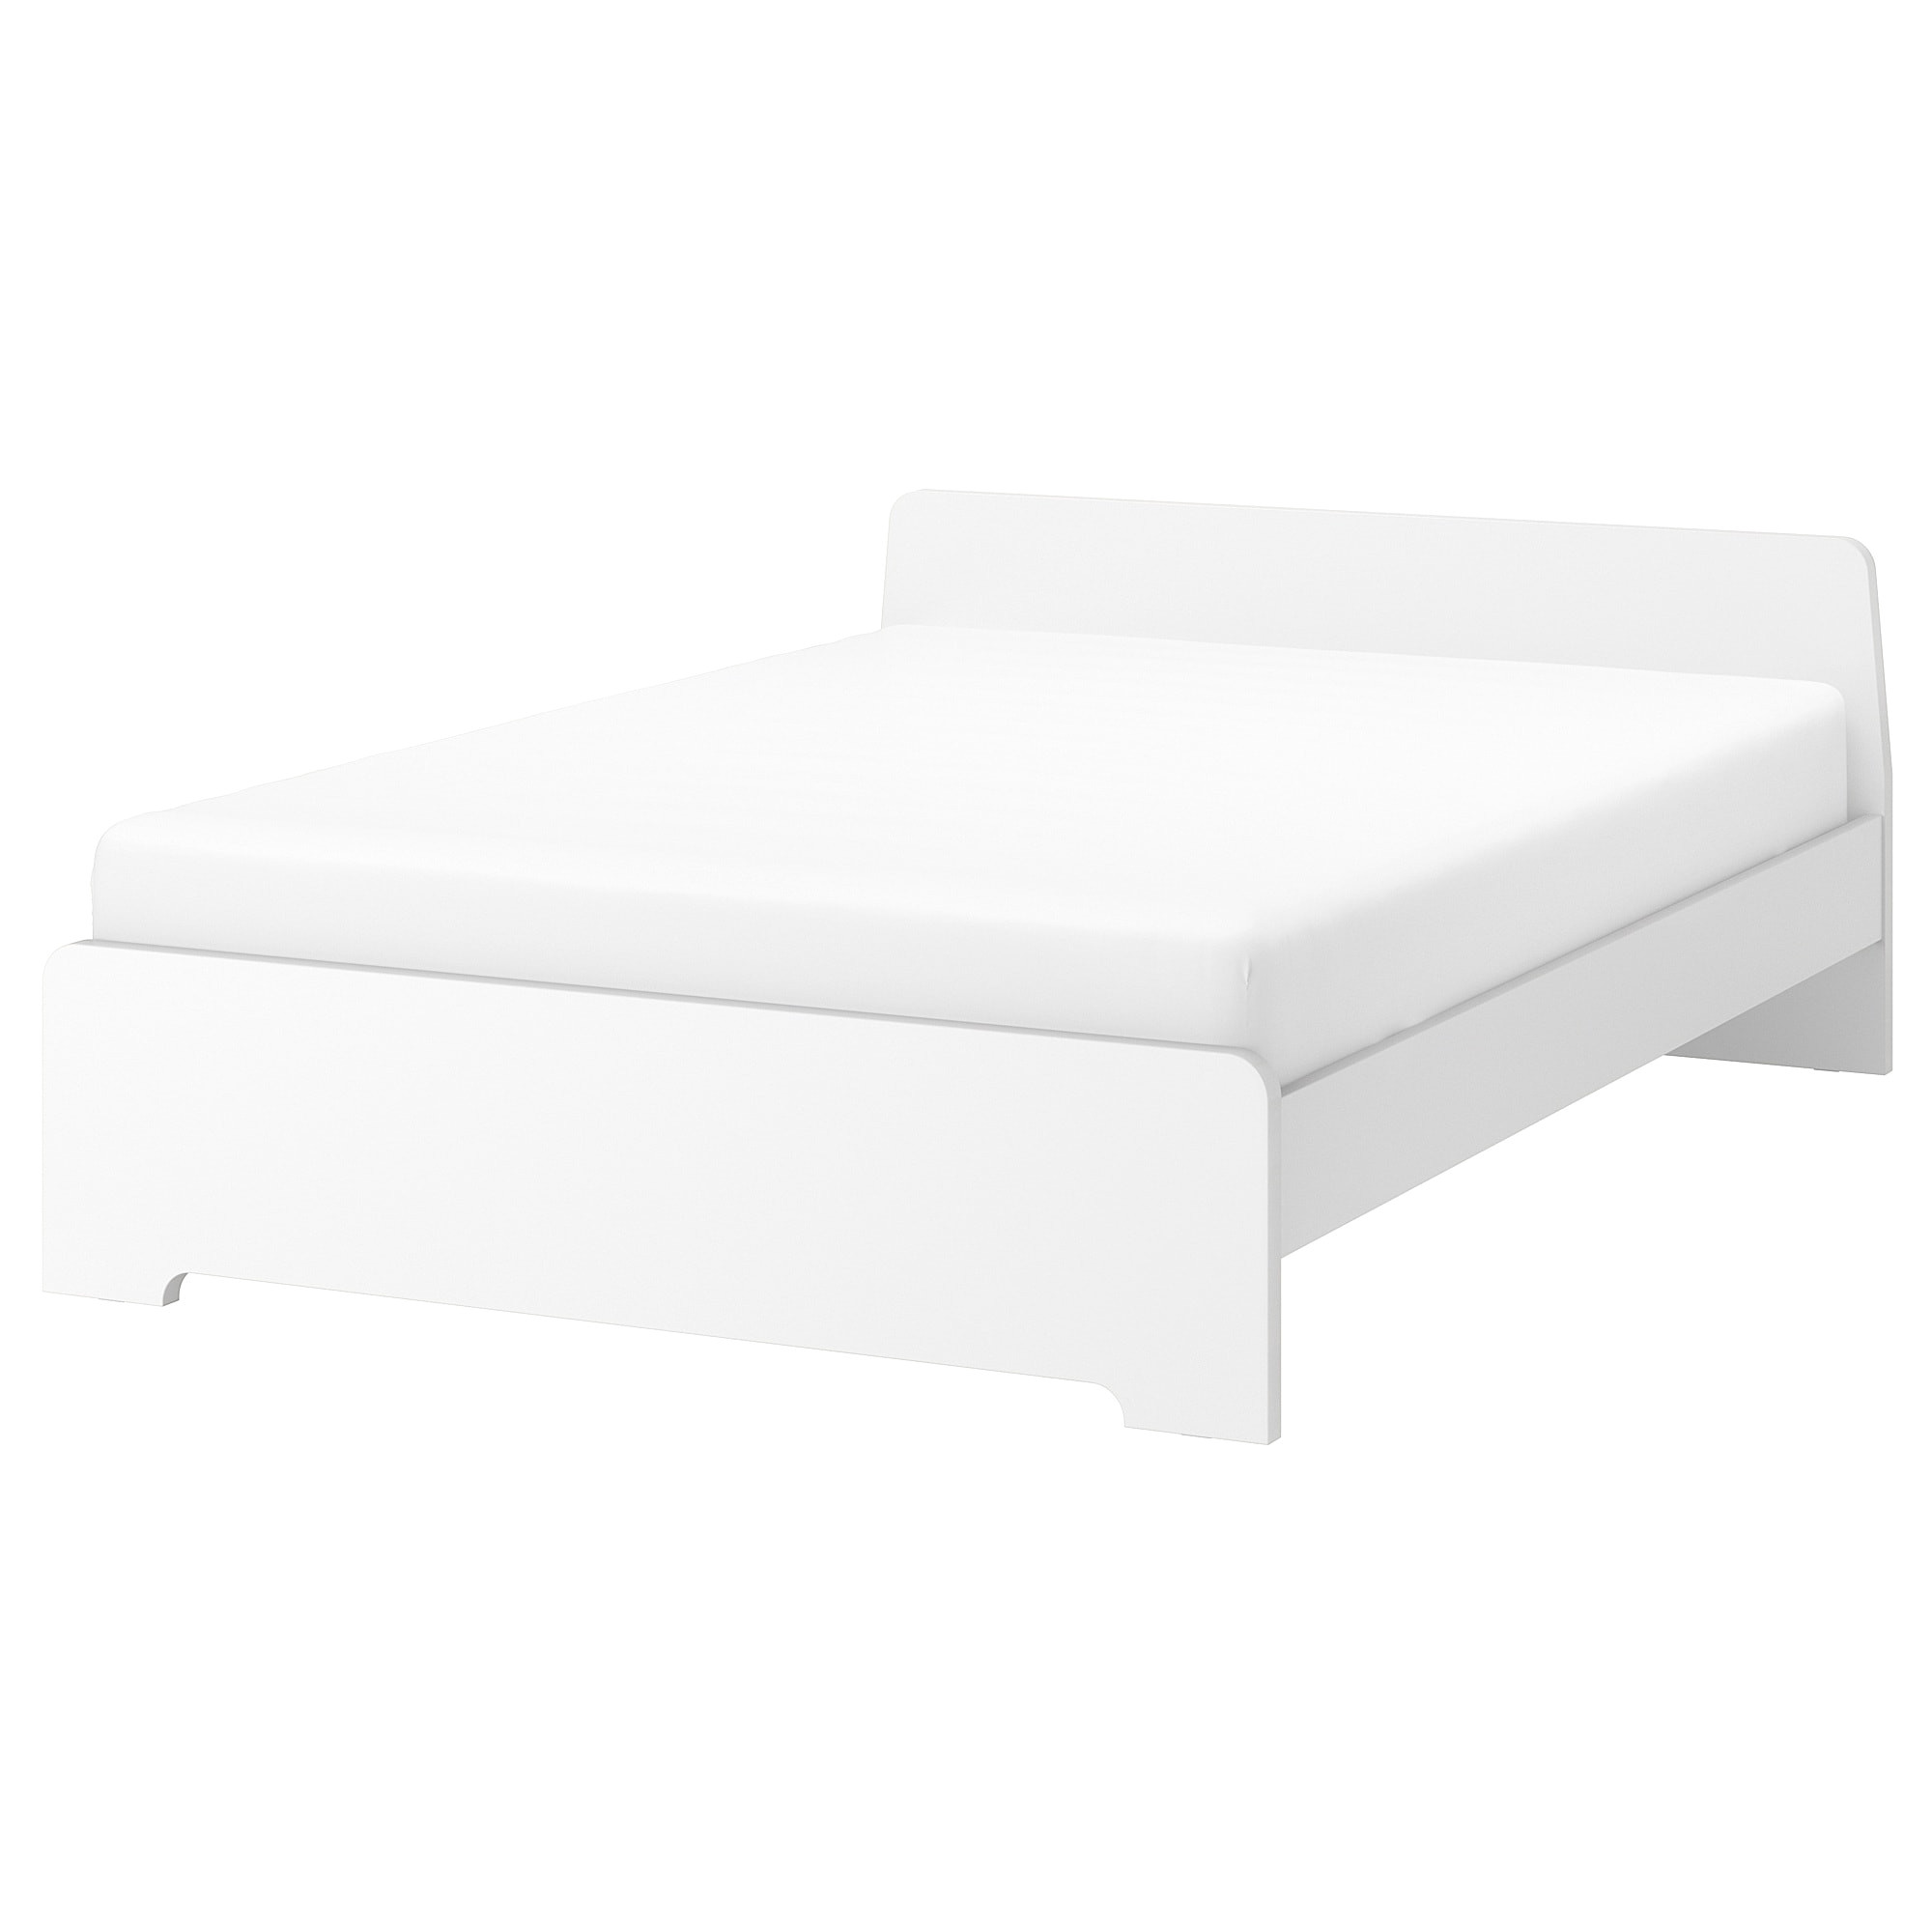 ikea askvoll bed frame adjustable bed sides allow you to use mattresses of different thicknesses